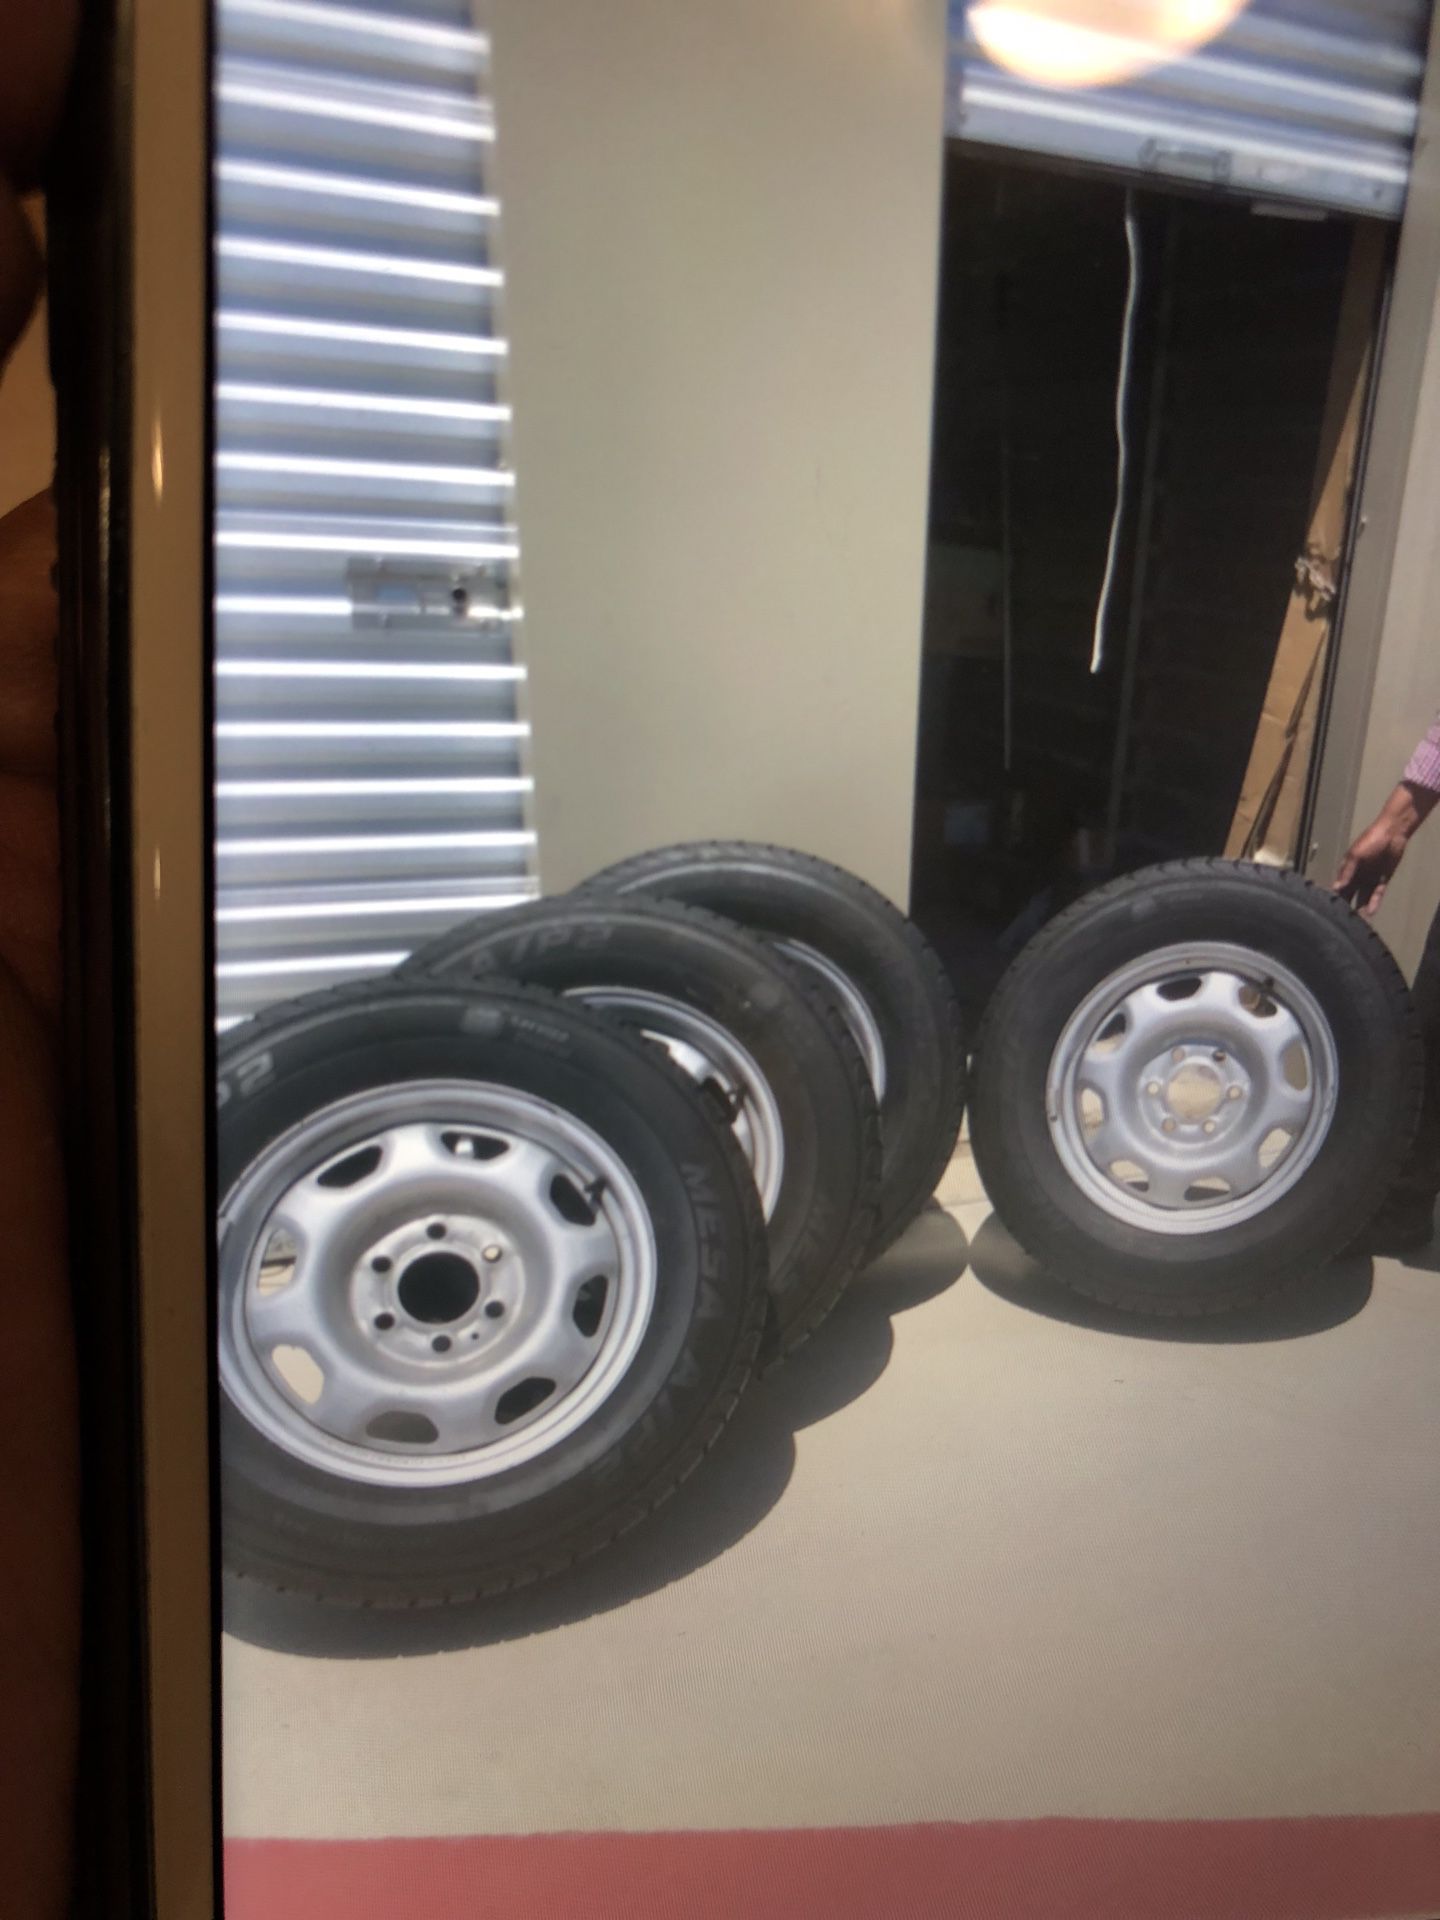 Ford F-150 Tires and Rims